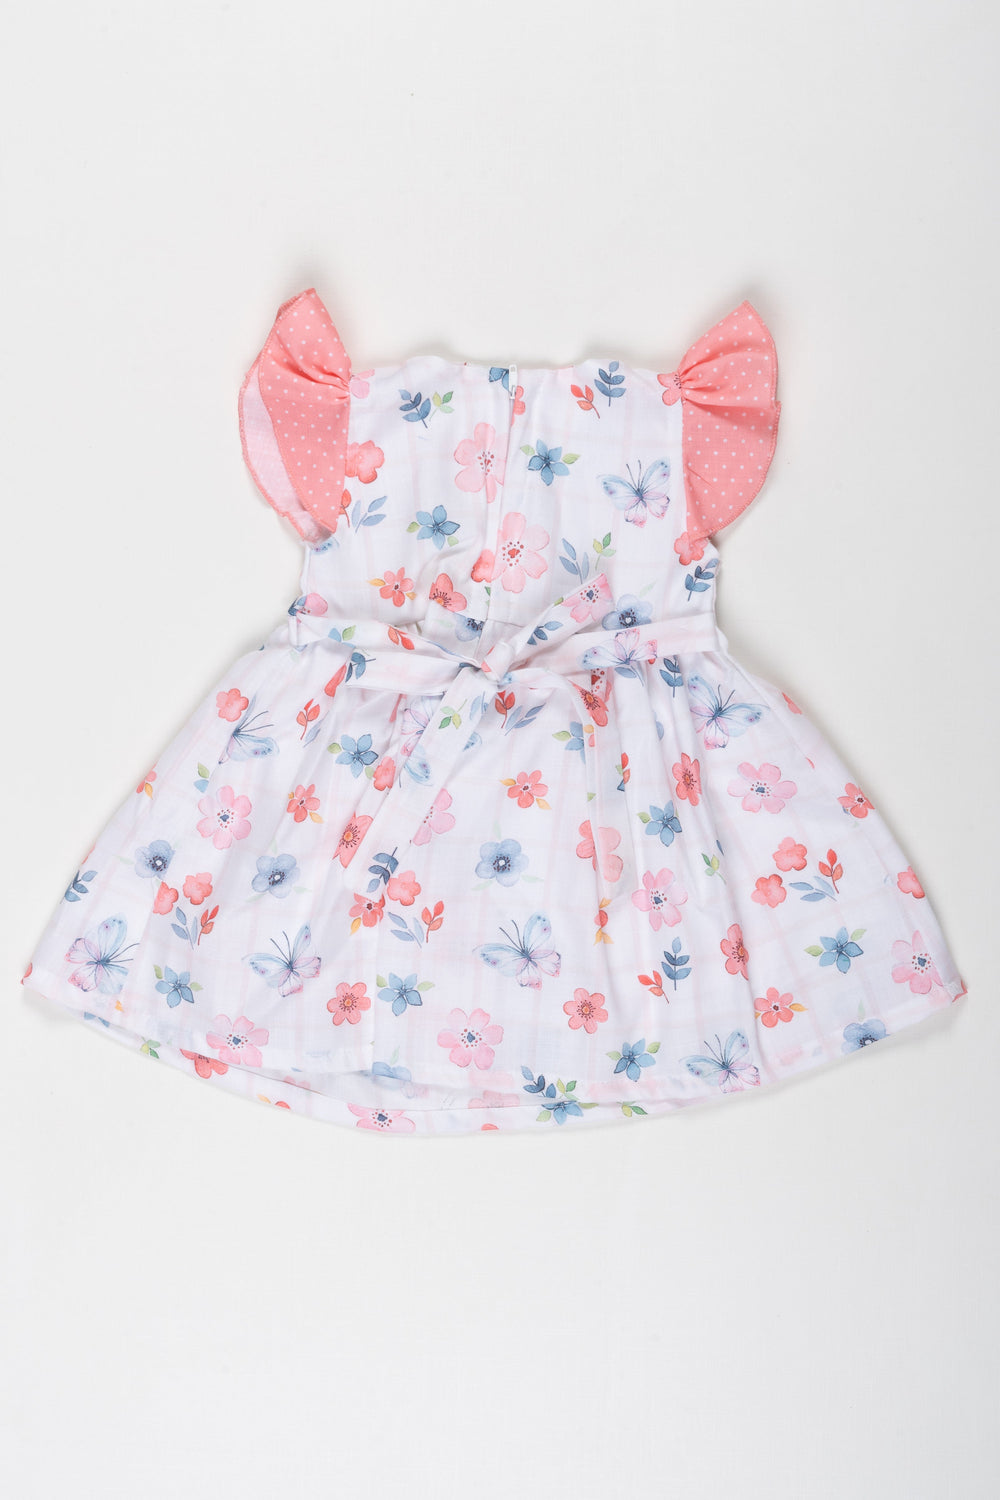 The Nesavu Baby Cotton Frocks Playful Petals Baby Girl Frock - Flutter Sleeves and Floral Charm Nesavu Playful Petals Baby Girl Frock | Flutter Sleeves and Floral Charm | The Nesavu